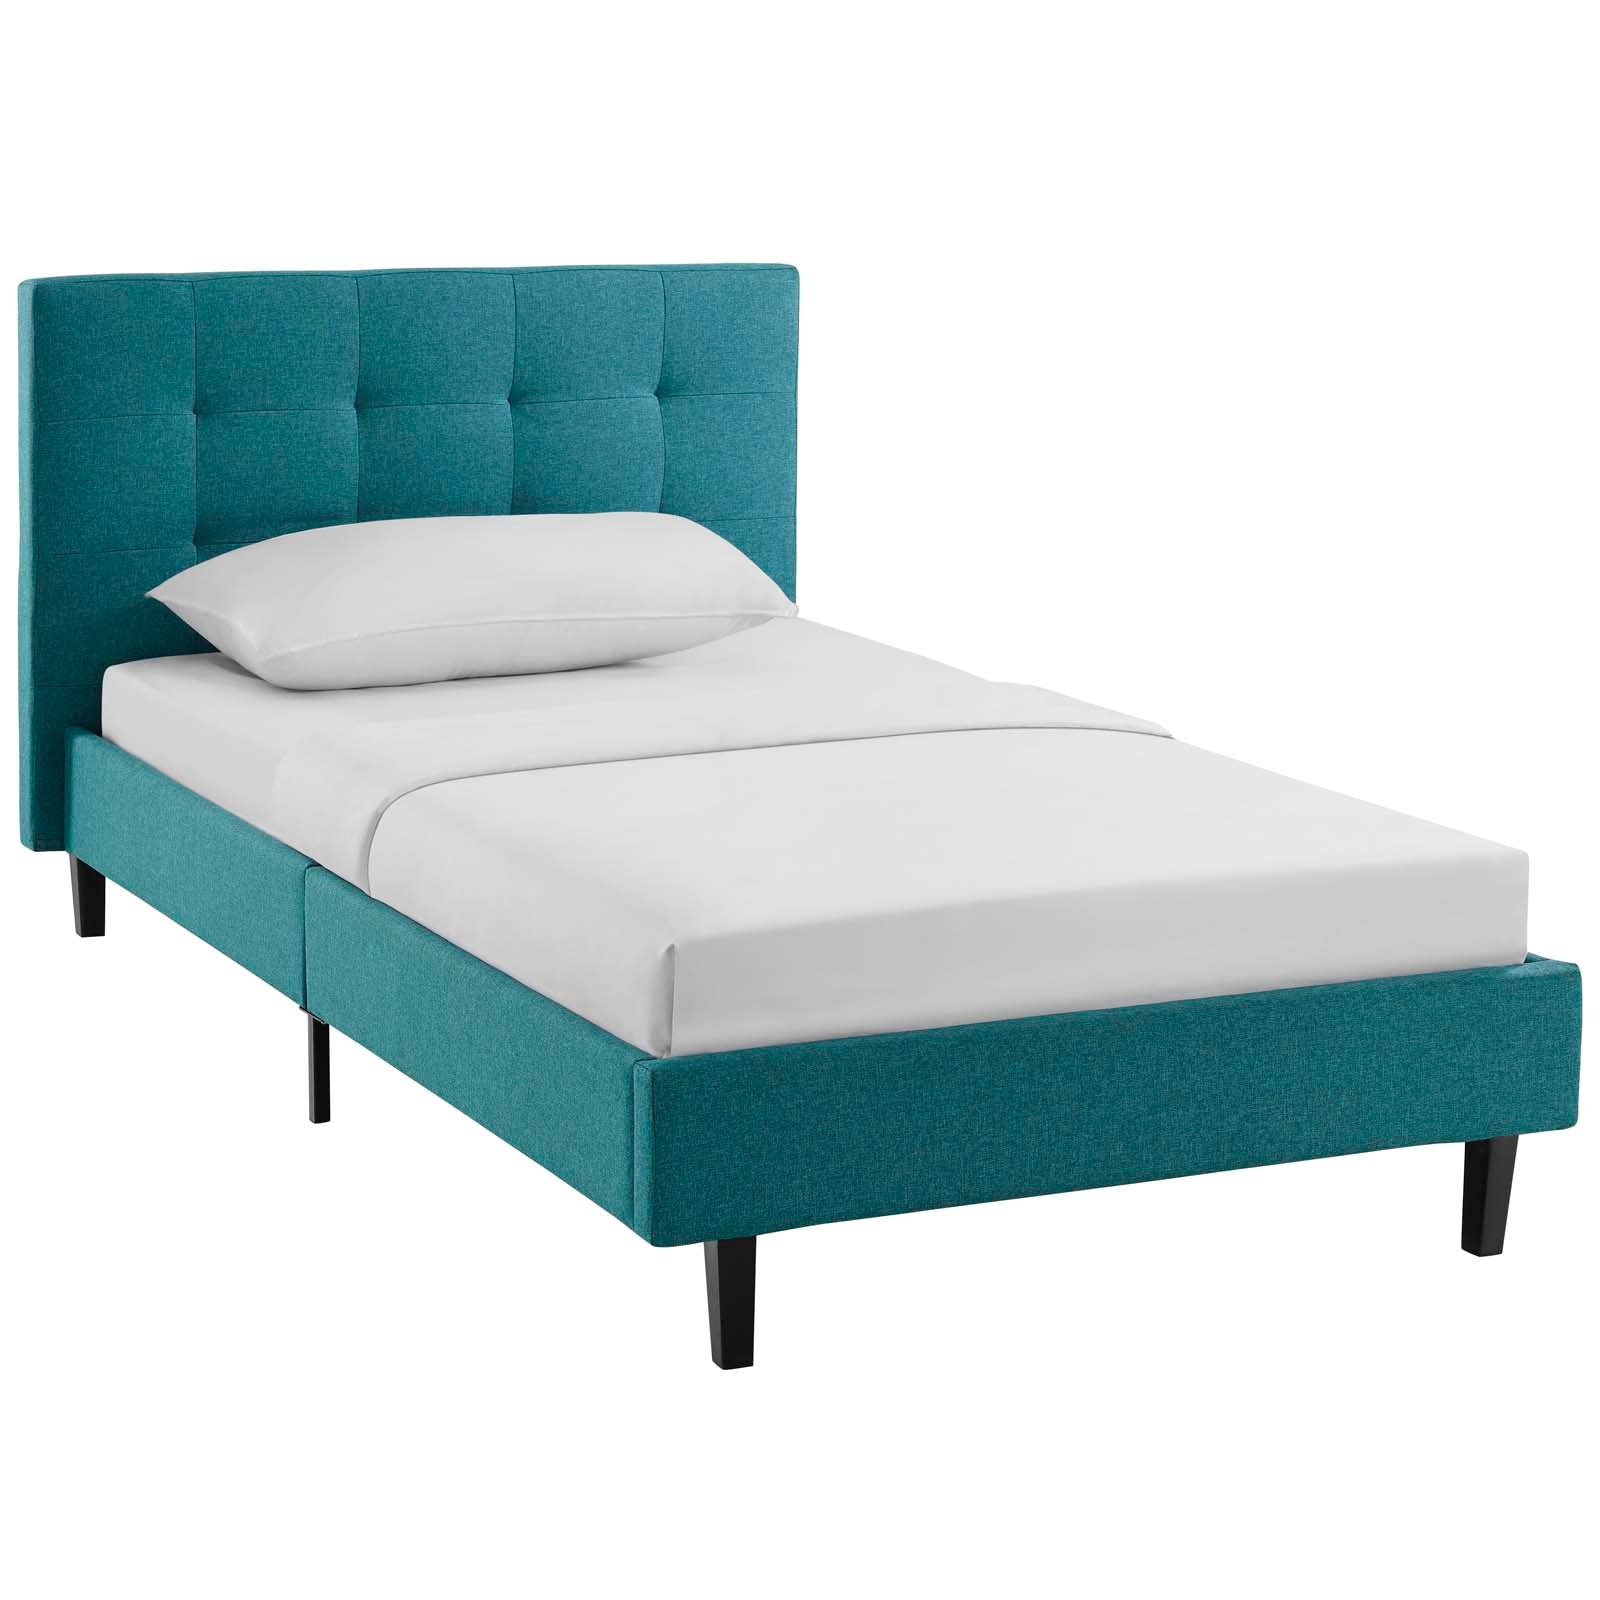 Modway Beds - Linnea Twin Bed Teal